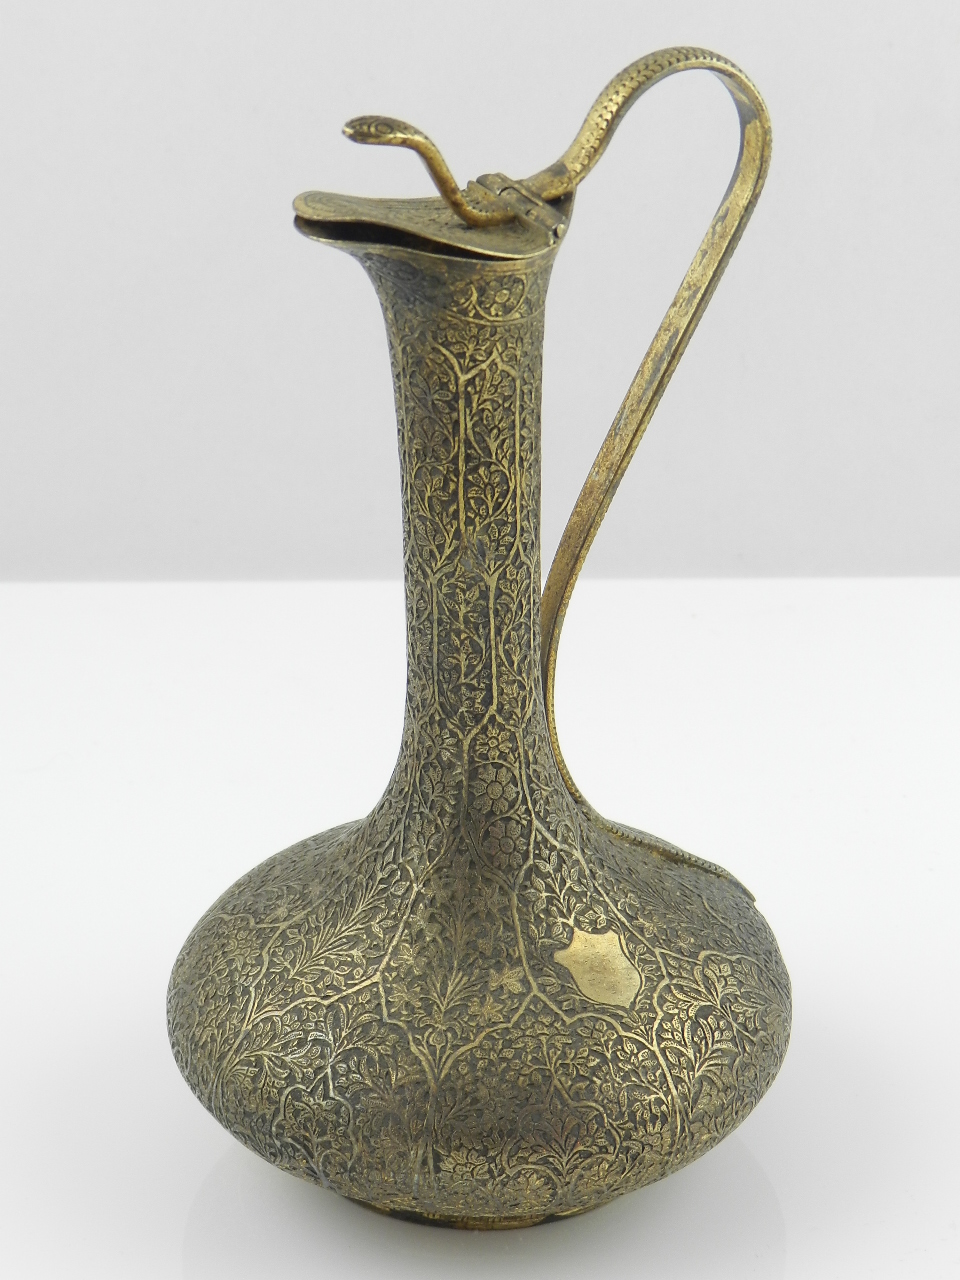 An early 20th century Islamic metal ewer with a cobra head handle and profuse floral decoration